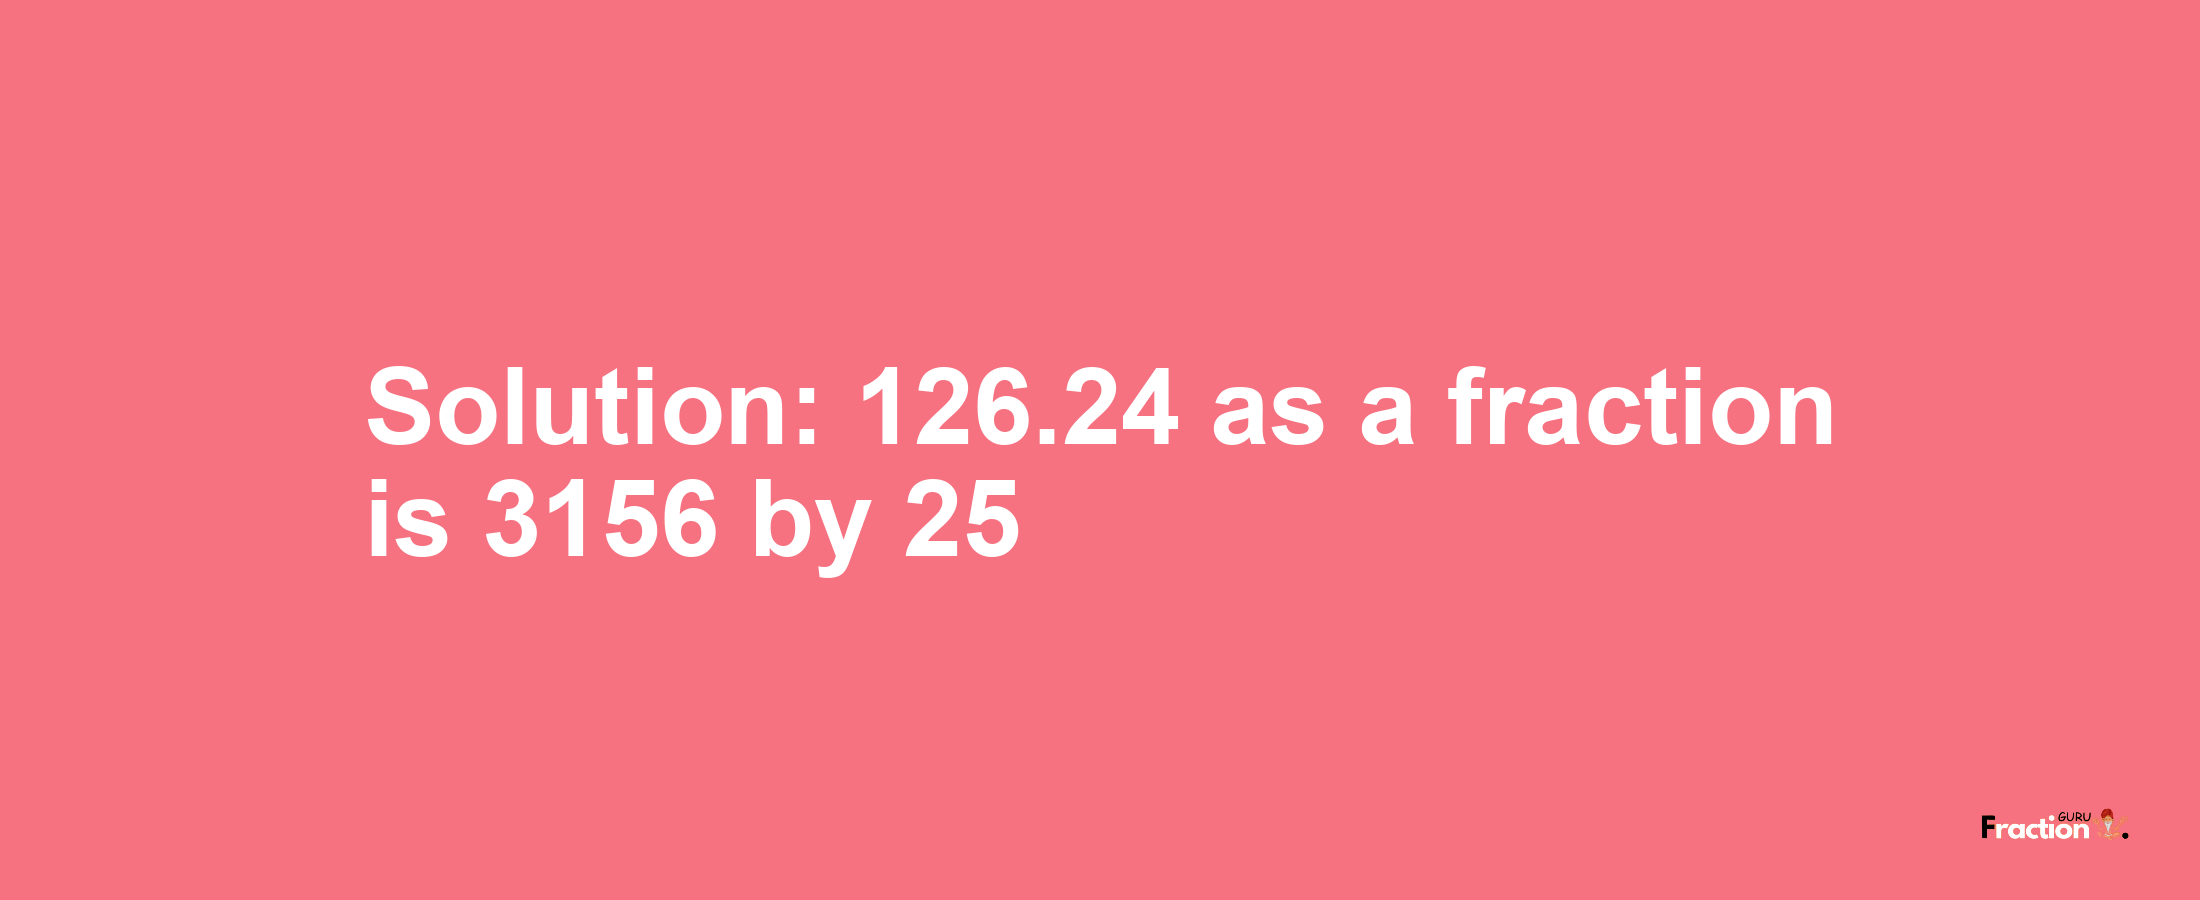 Solution:126.24 as a fraction is 3156/25